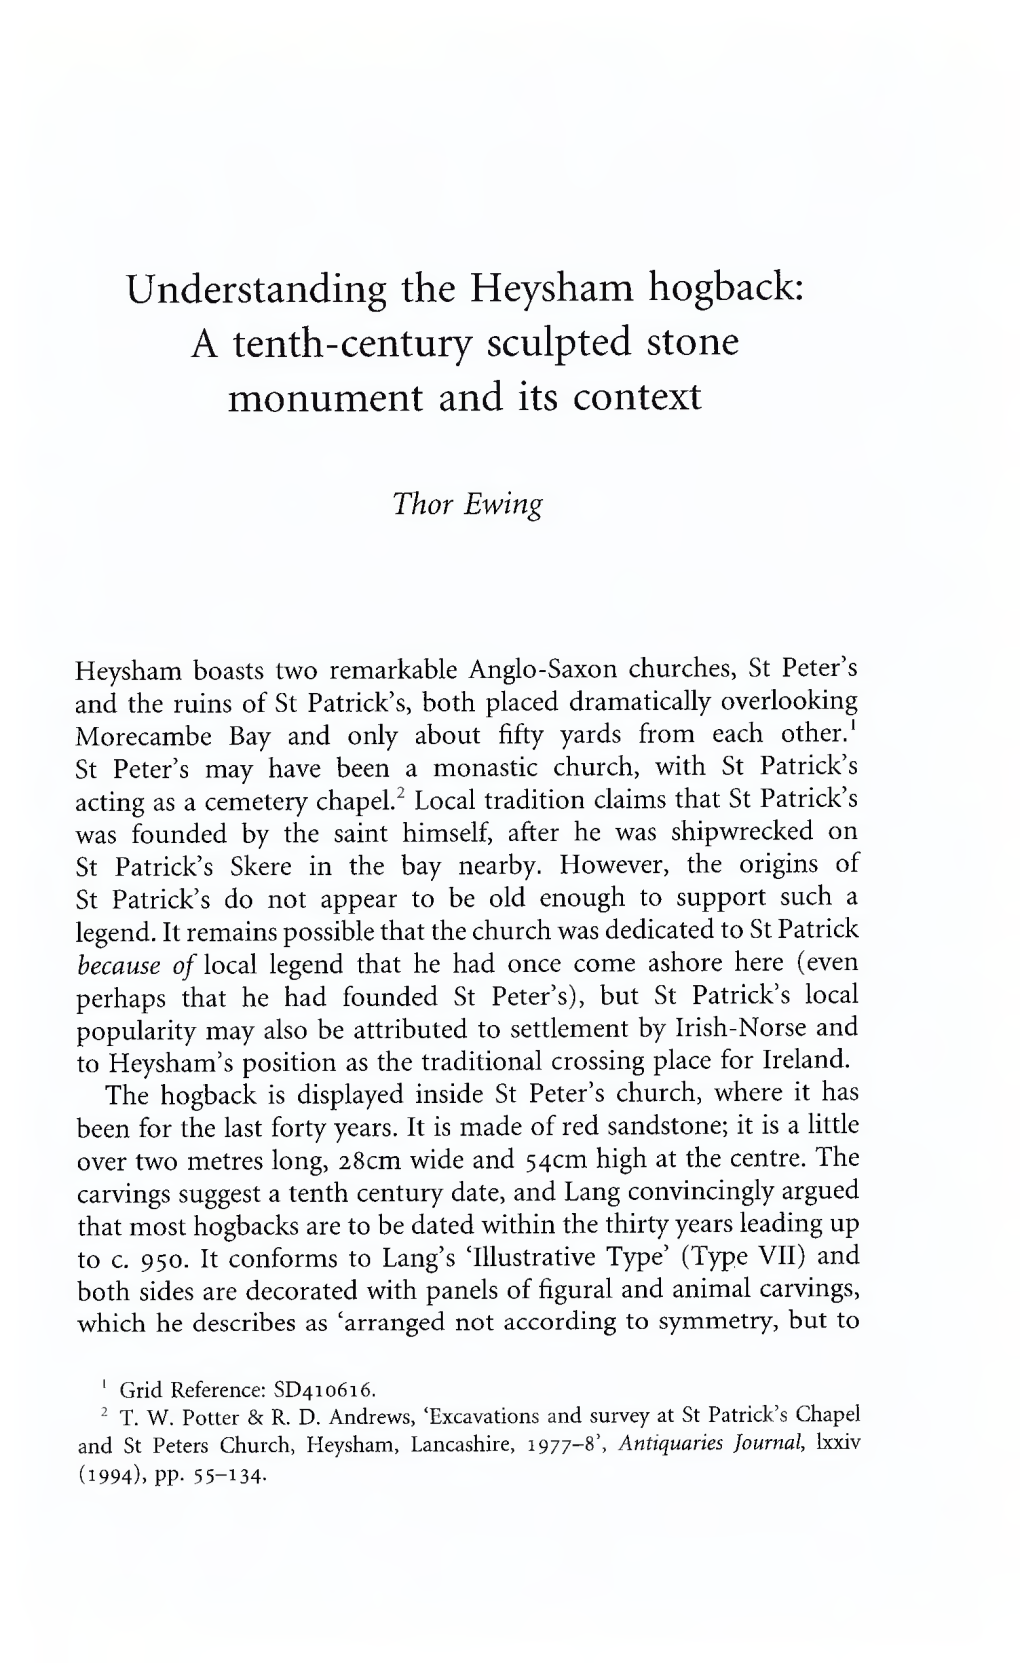 Understanding the Heysham Hogback: a Tenth-Century Sculpted Stone Monument and Its Context